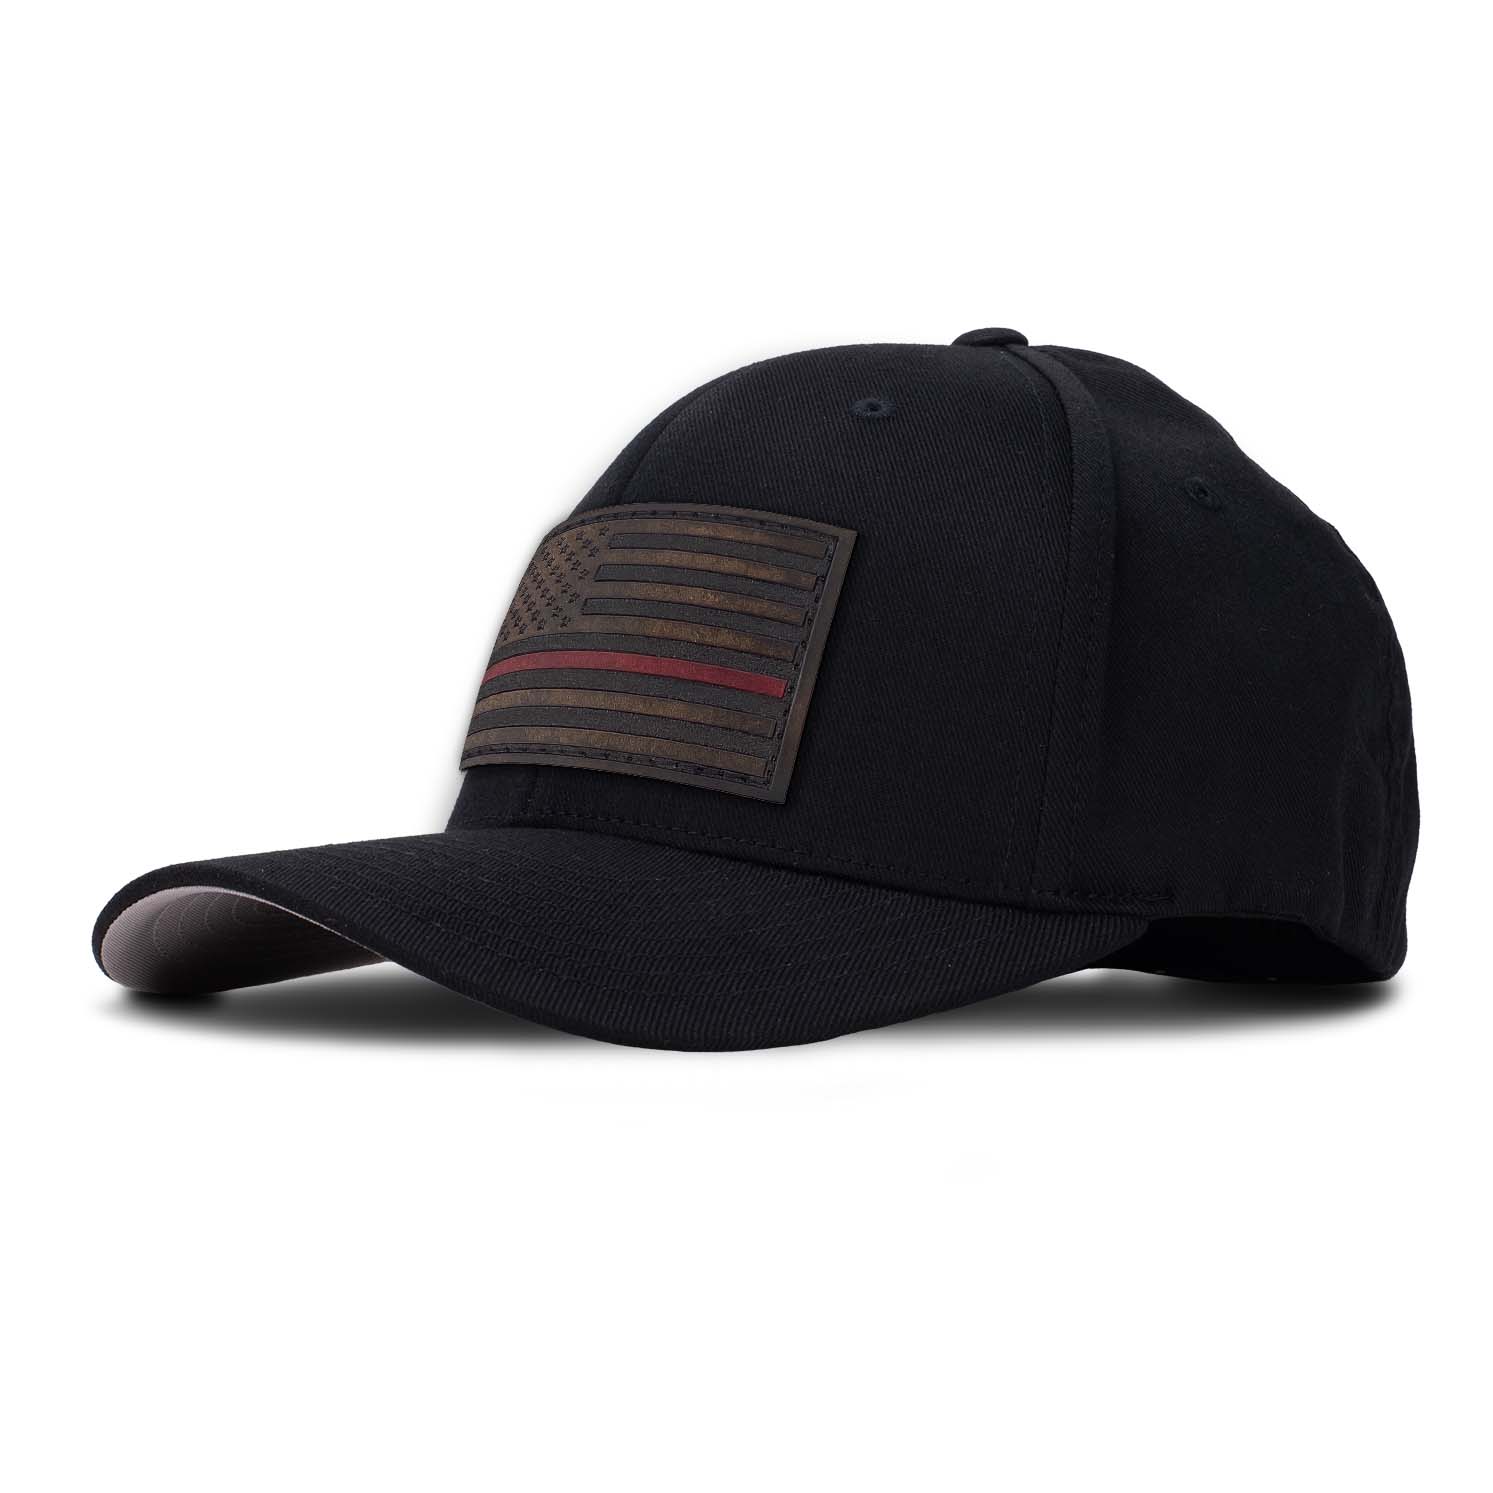 Revolution Mfg all black curved bill  FlexFit hat featuring our Thin Red Line American Flag full grain leather patch.